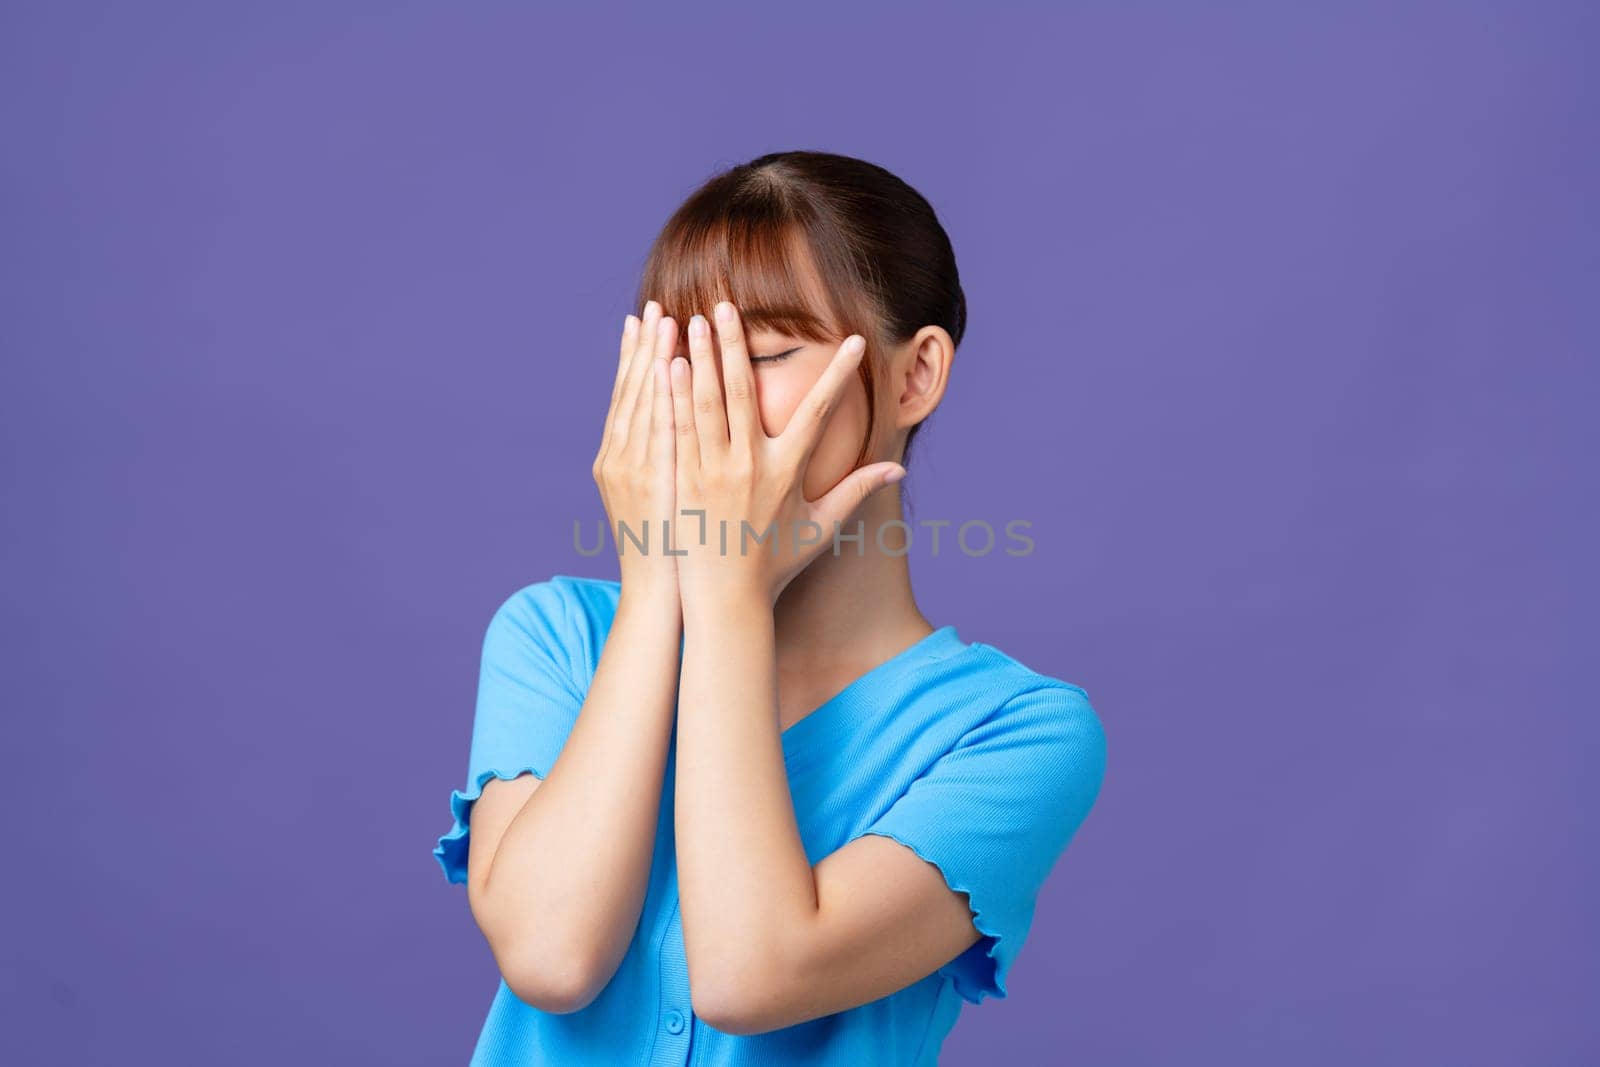 Young woman covering face with hands, looking through fingers, peeking with curiosity at something